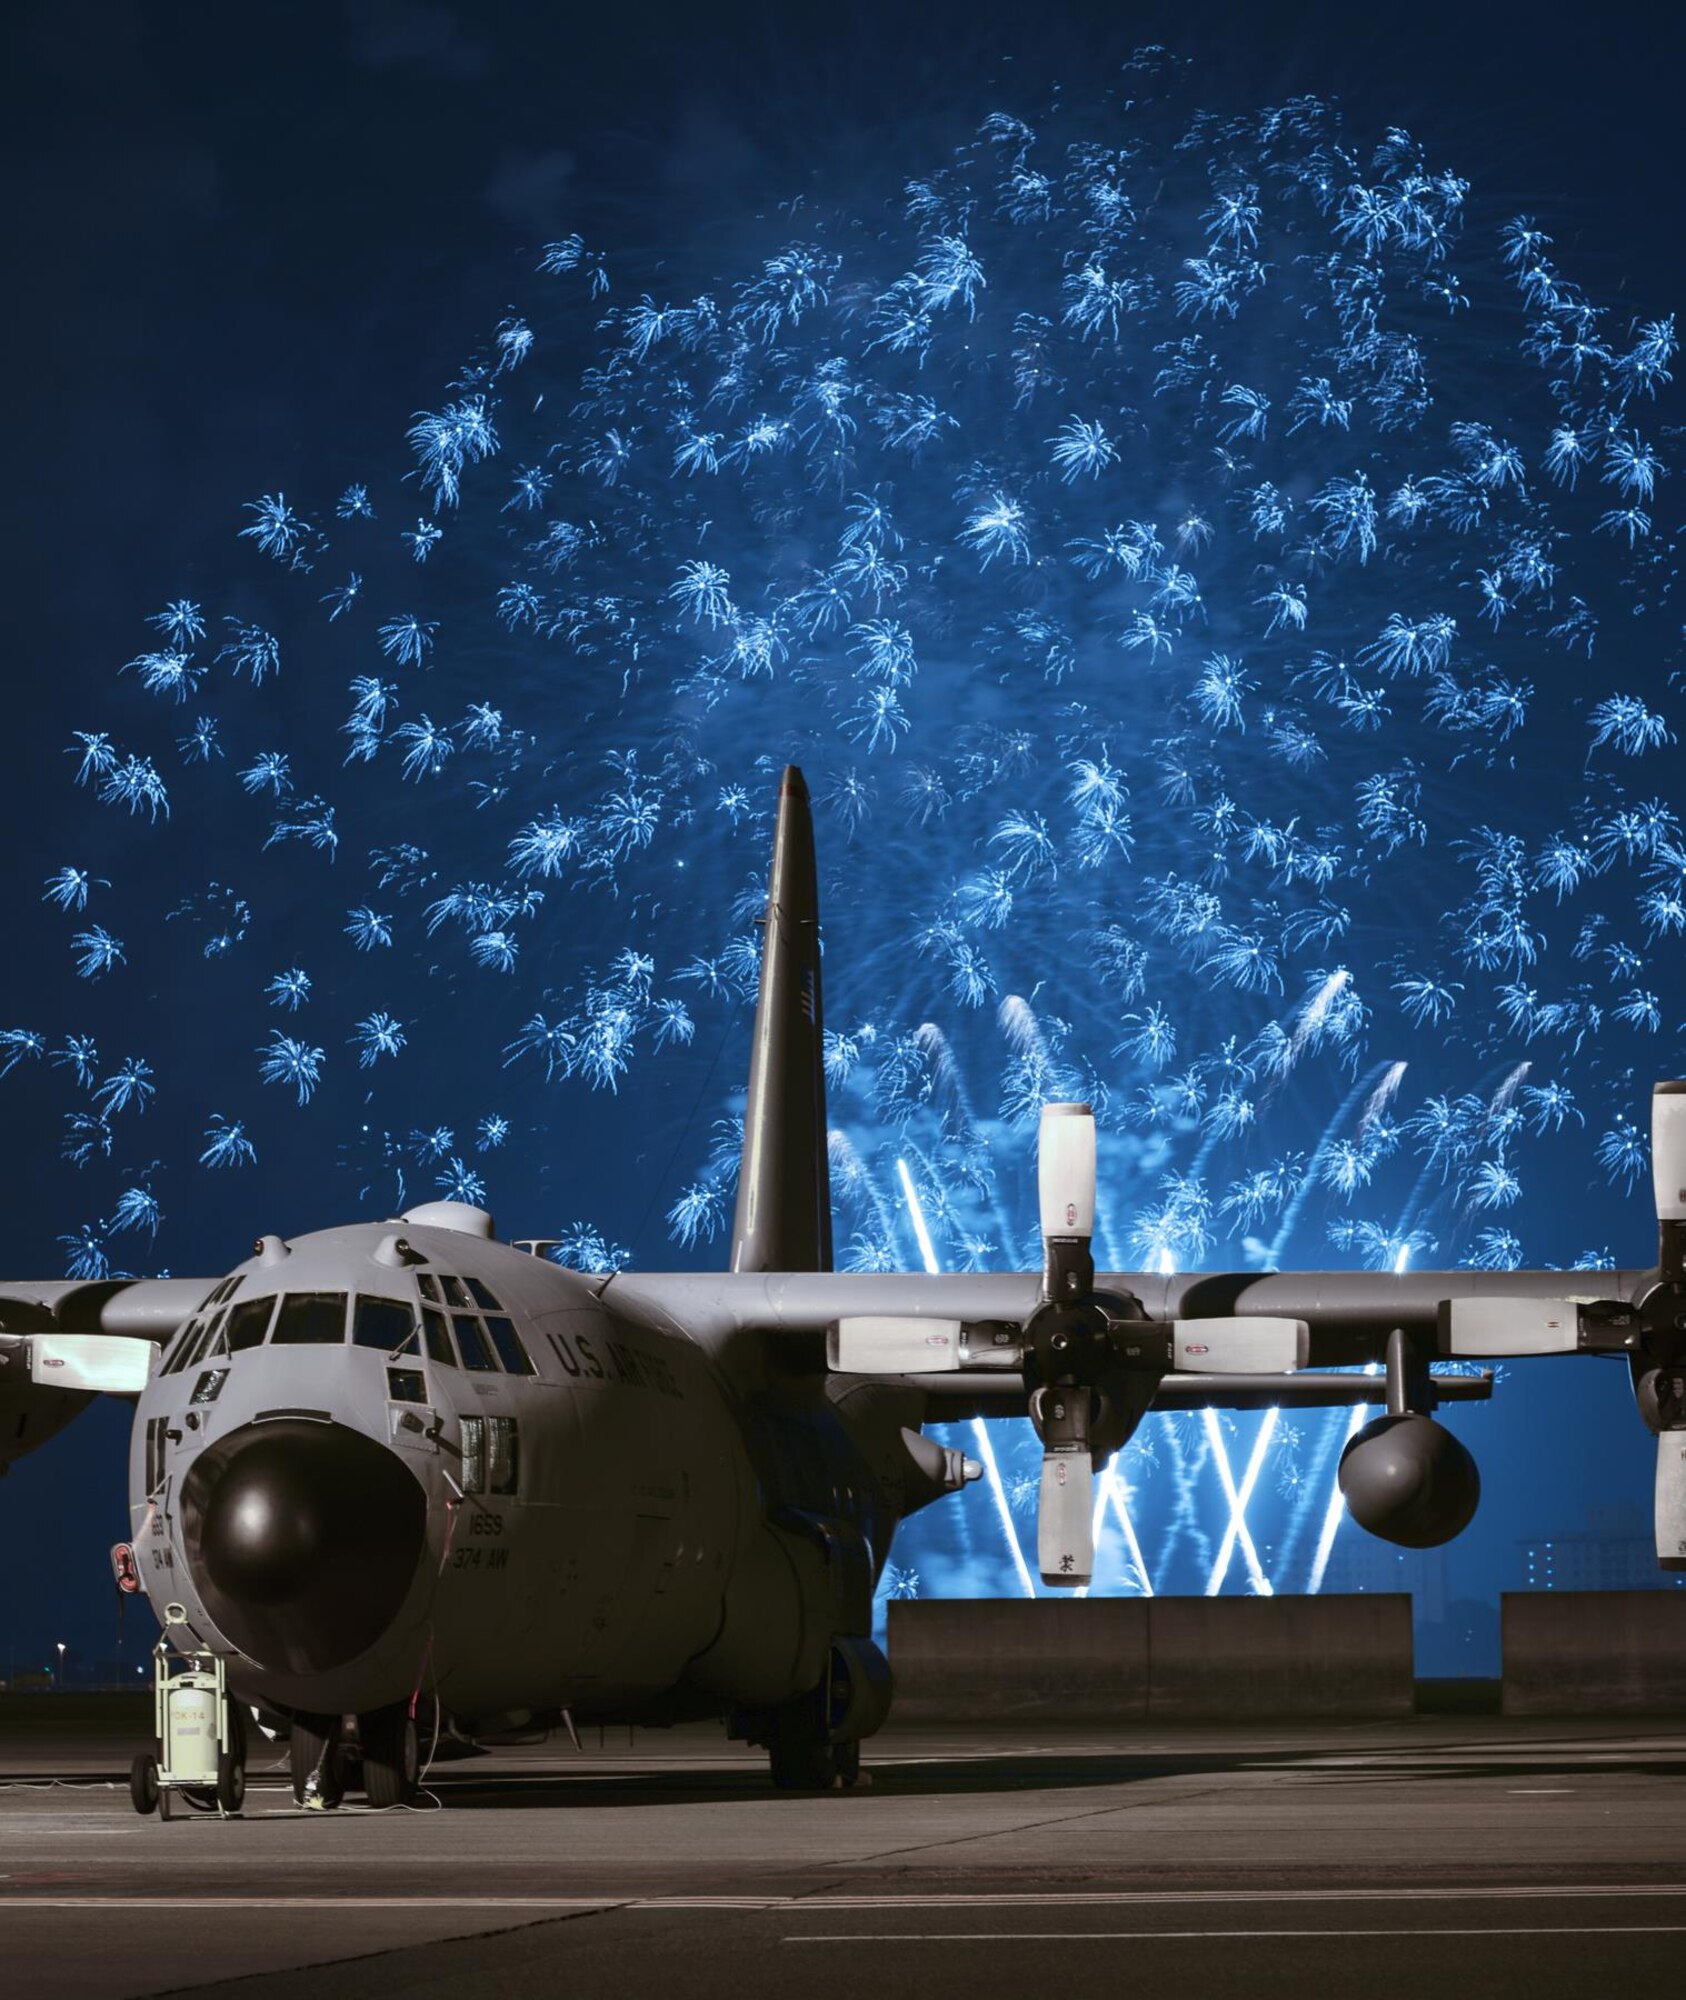 Fireworks explode behind a C-130 Hercules during Celebrate America, July 2, 2015, at Yokota Air Base, Japan. Celebrate America is an annual event that provides military members and their families the opportunity to enjoy games, food and bands before culminating in a fireworks display over the Yokota airfield to celebrate Independence Day. (U.S. Air Force photo by Airman 1st Class Delano Scott/Released)